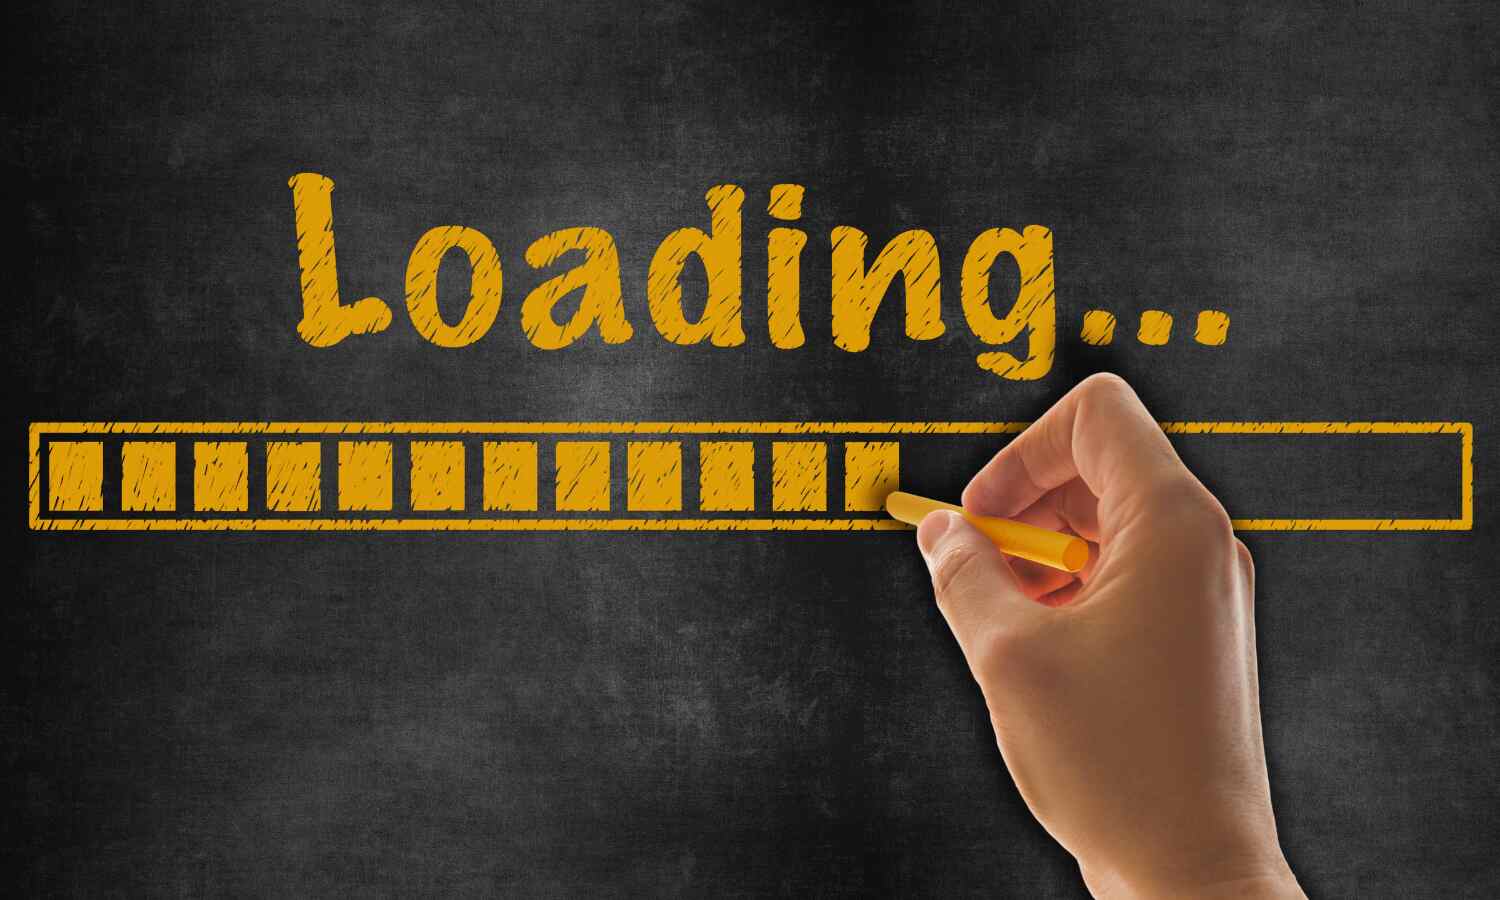 How Fast Should Websites Load in 2023, According to Page Loading?